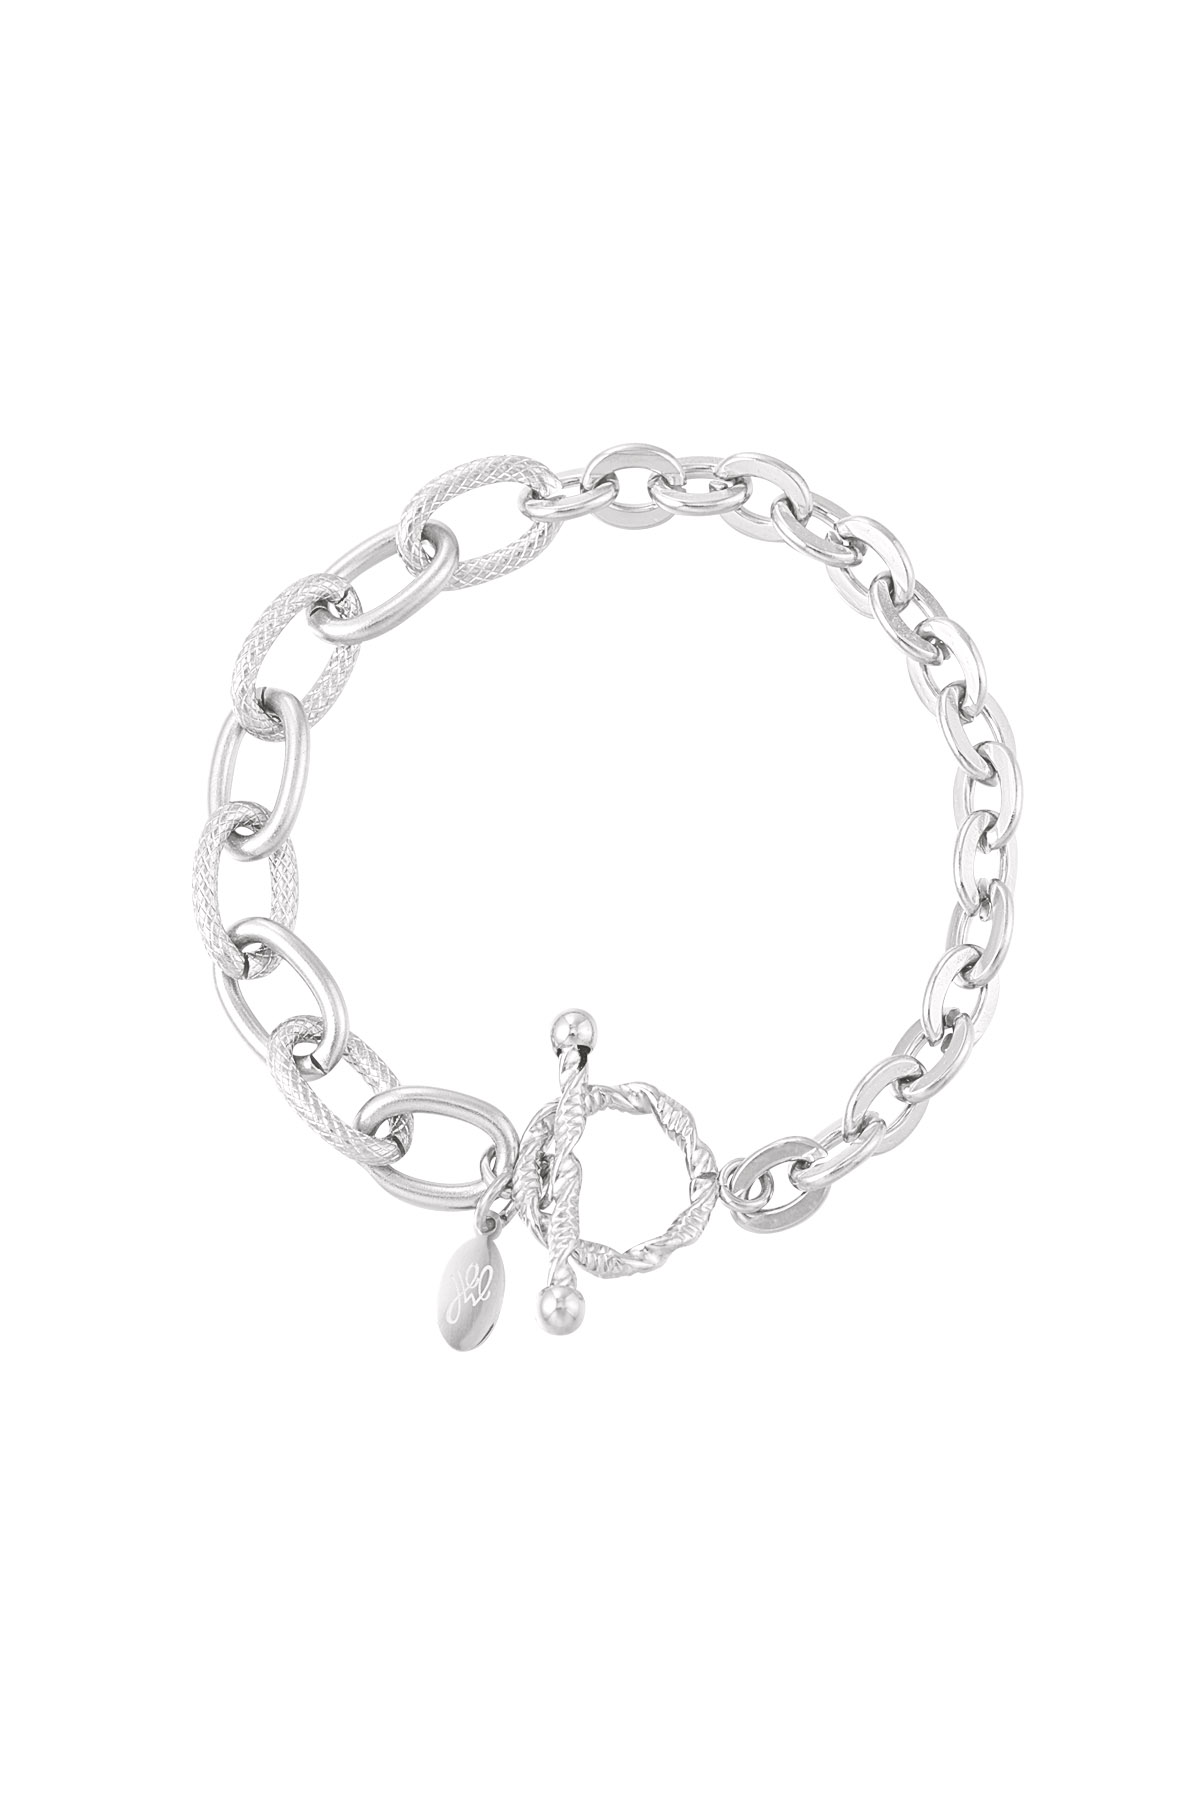 Bracelet links from small to large - silver